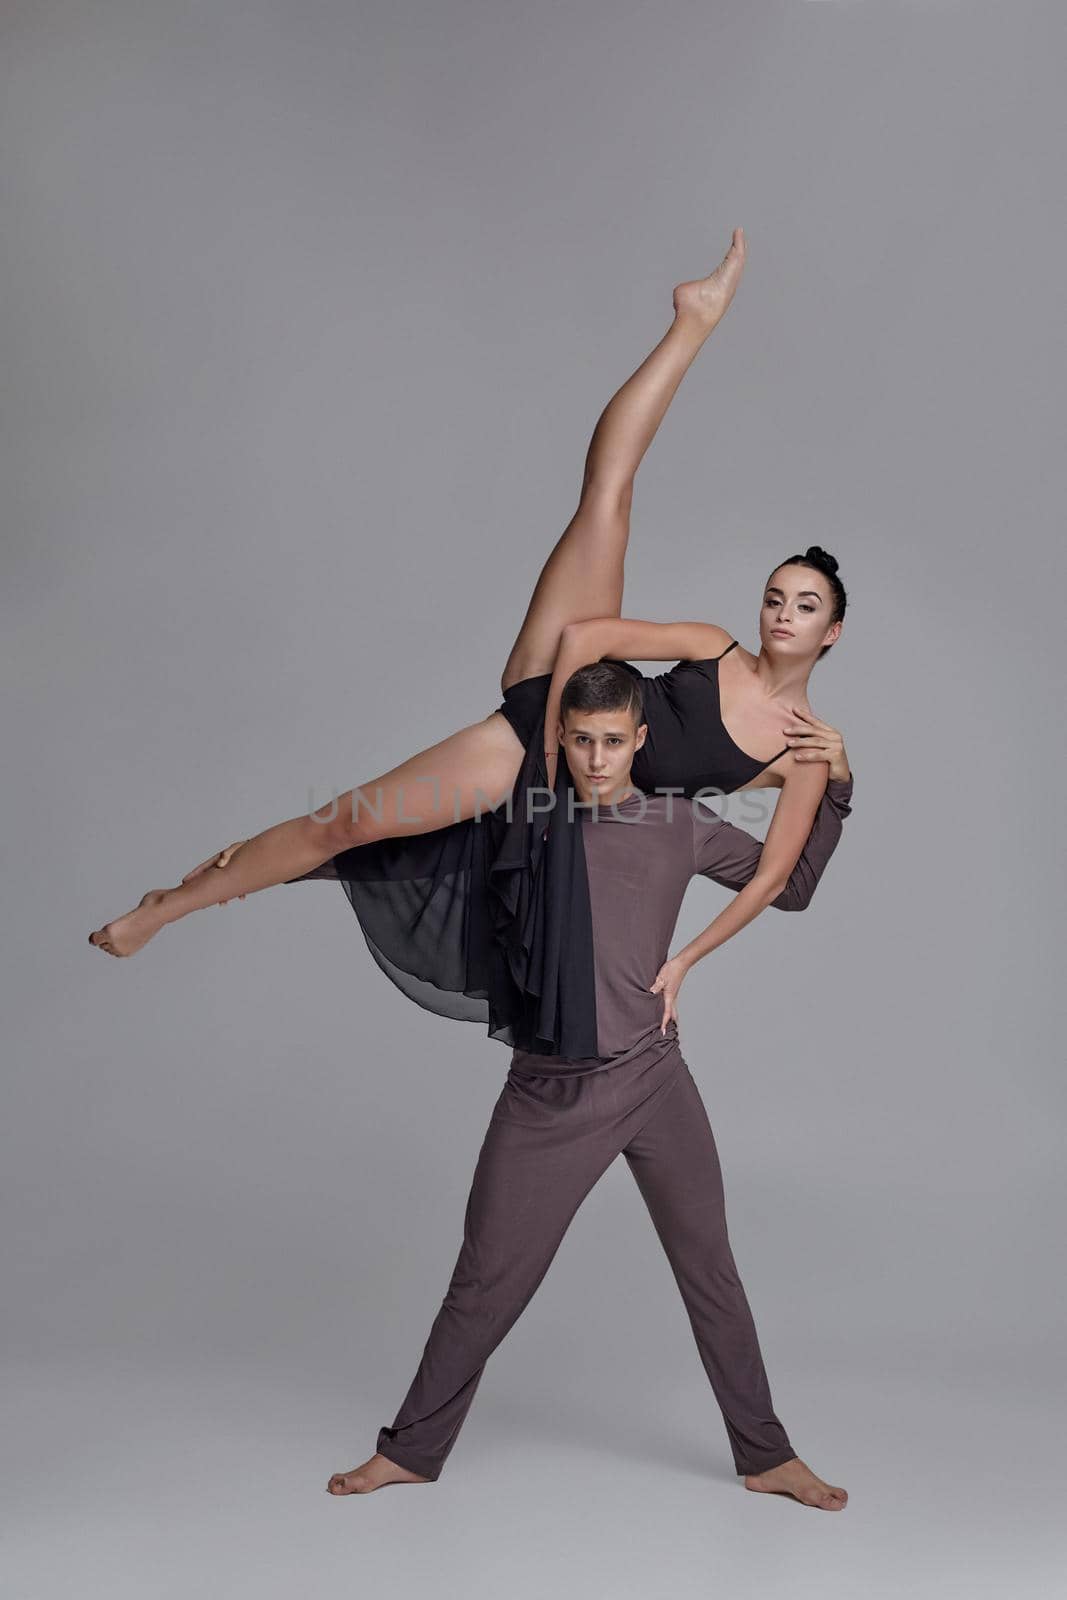 Pair of a graceful ballet dancers are posing over a gray studio background. Handsome man in a gray tracksuit and beautiful woman in a black dress are dancing together. Ballet and contemporary choreography concept. Art photo.